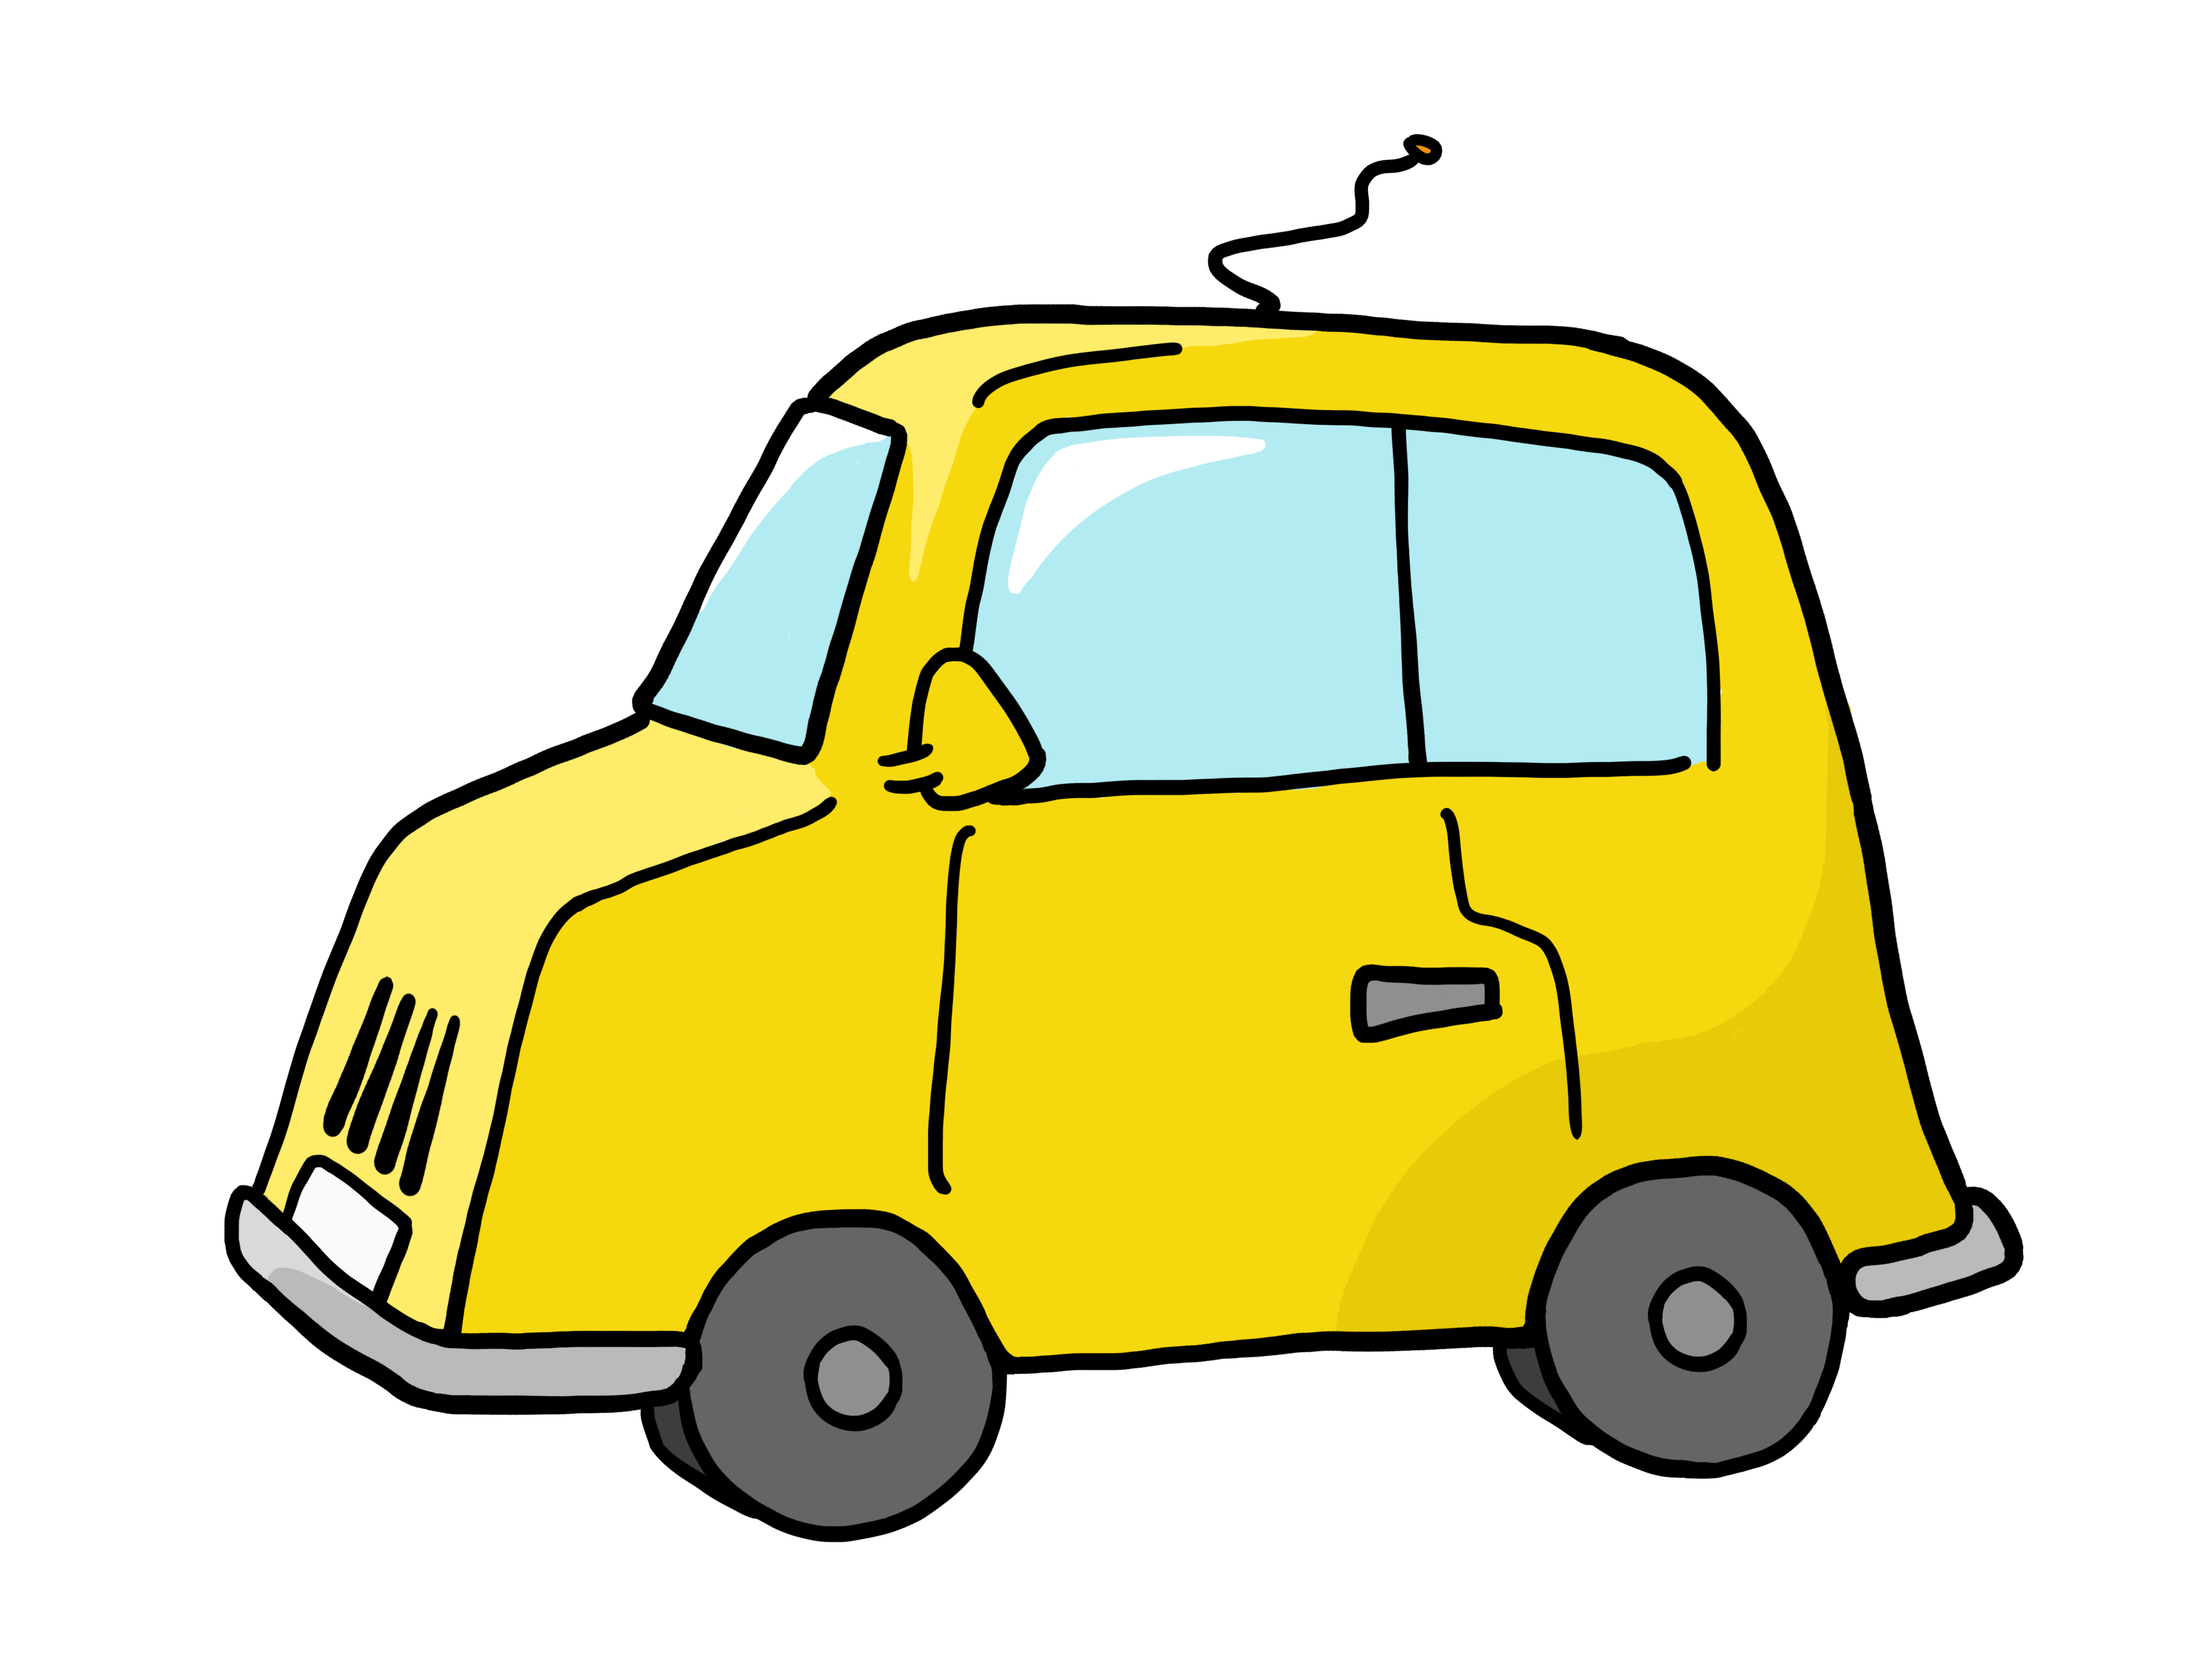 Delivery Car Clipart   Clipart Panda   Free Clipart Images